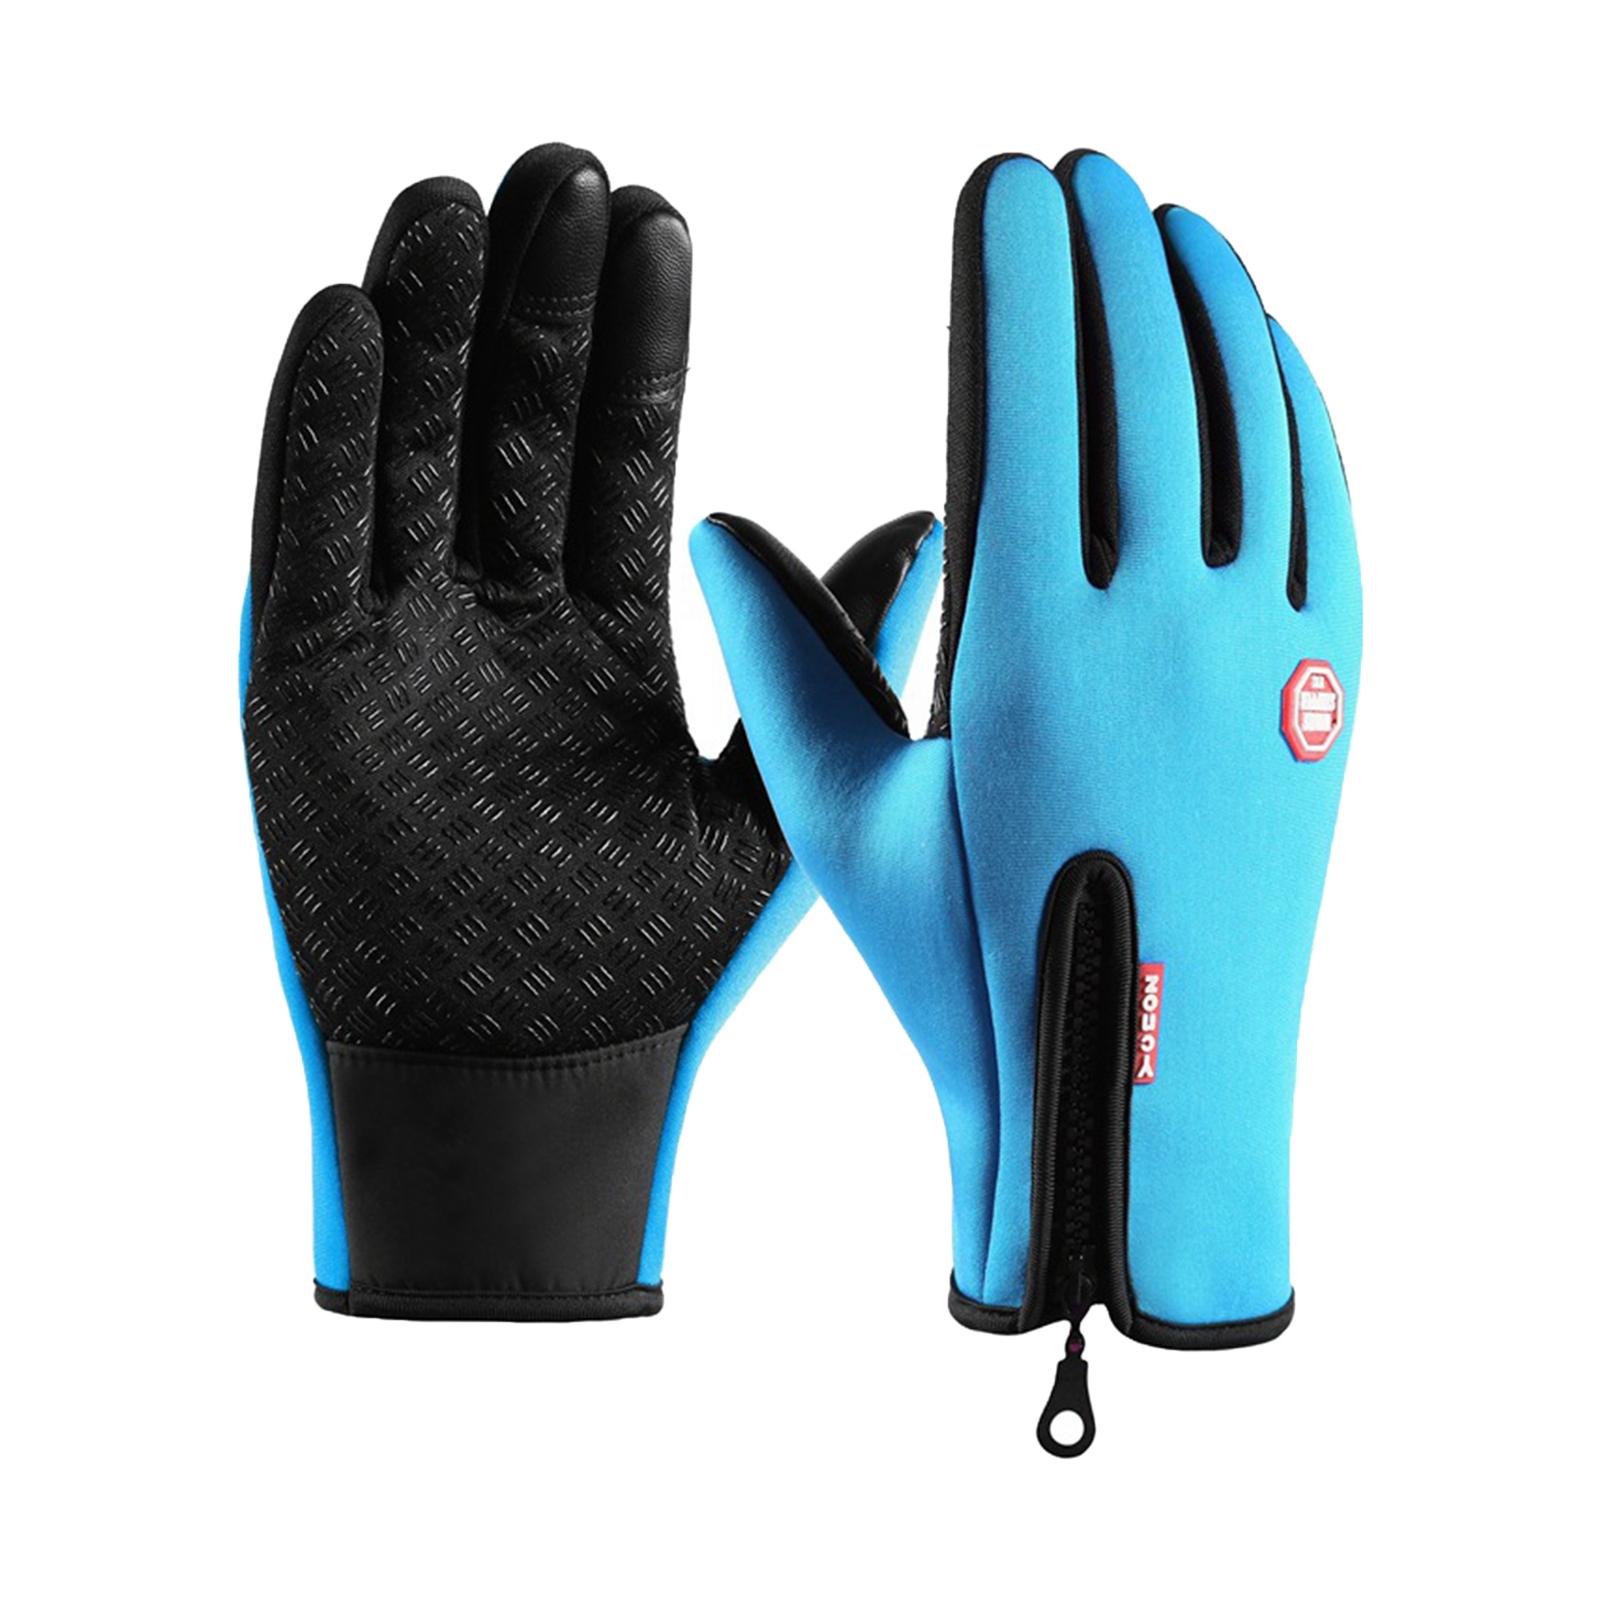 Winter Gloves Windproof Insulated for Motorcycle Cycling Adults Unisex XL Blue